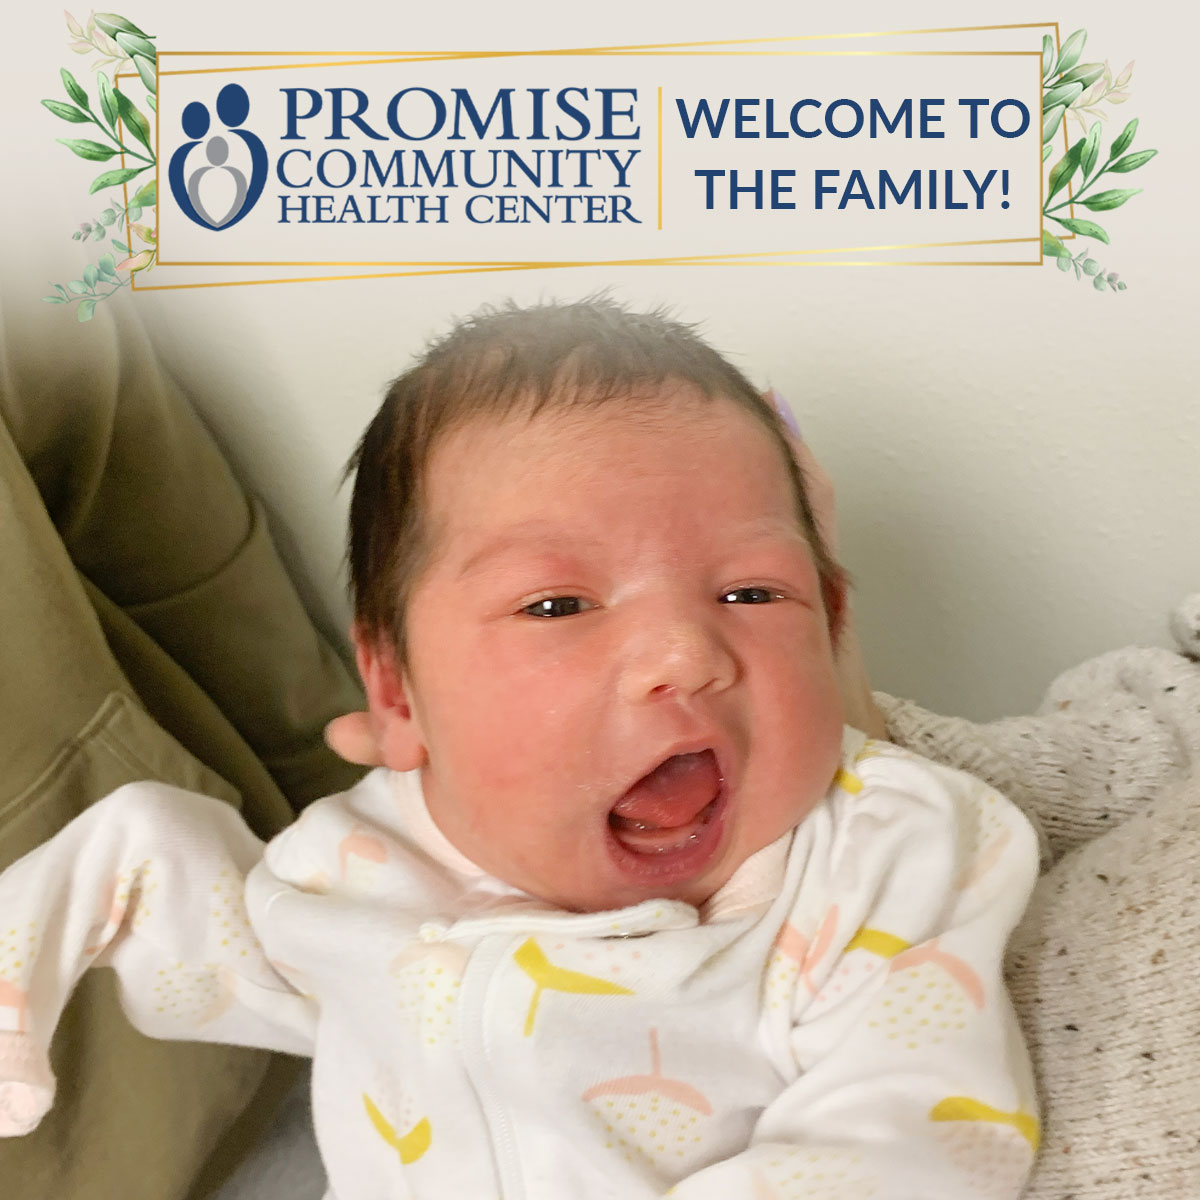 The Schniders opened their home for Rhodes's home birth in Sheldon, Iowa. Certified Nurse Midwife Kari Ney and OB Nurse Kris Tinklenberg helped deliver Miss Rhodes during the birth at their home.